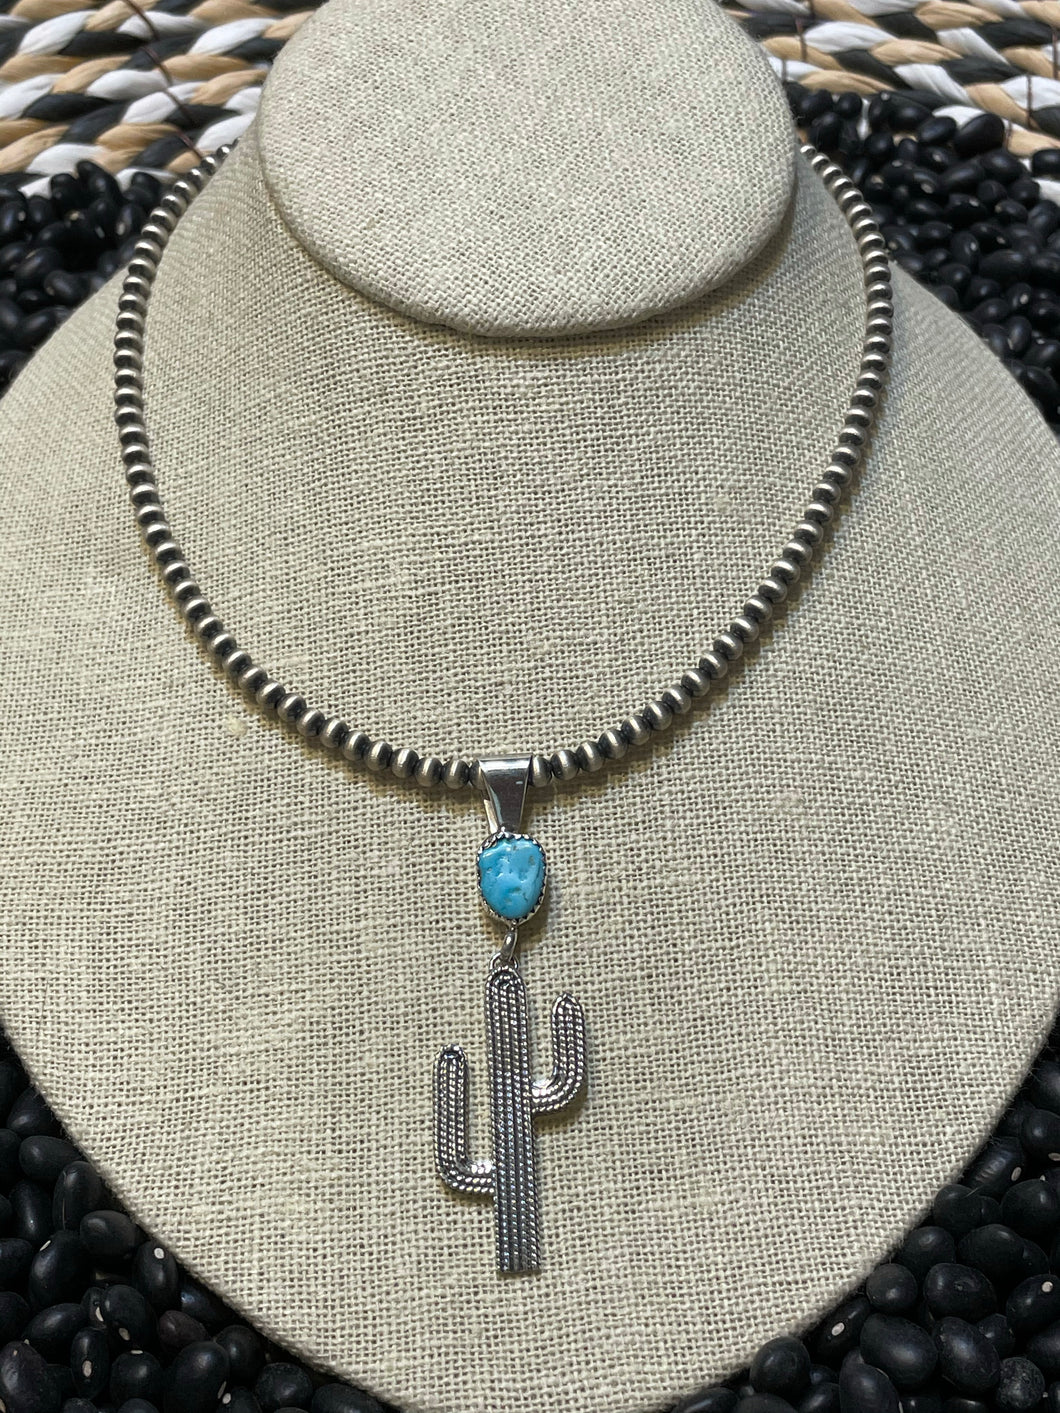 Cactus and turquoise pendant